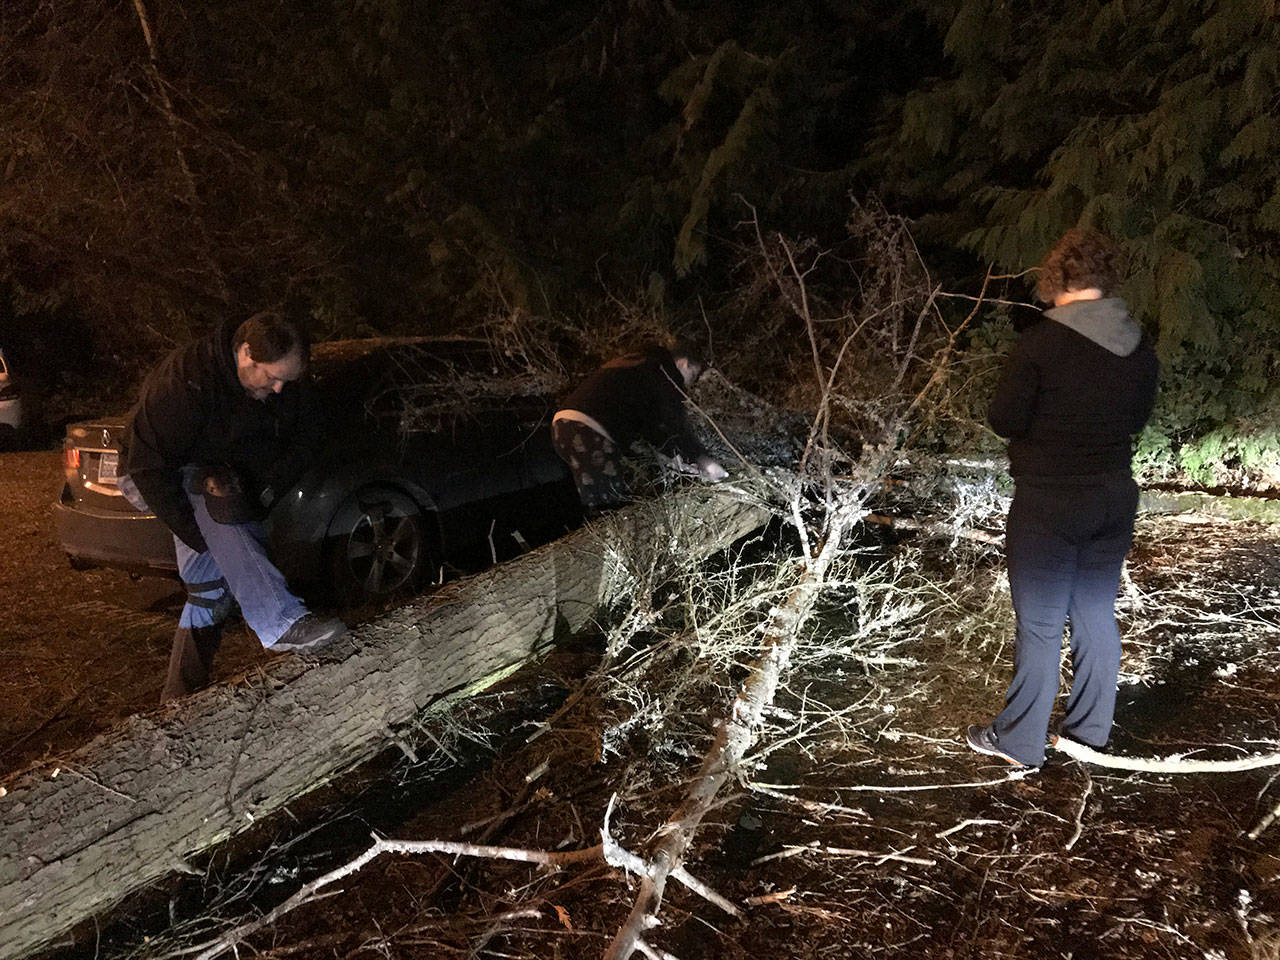 Residents on Finn Hill in Kirkland work together to trim branches off of a felled tree that landed in their complex parking lot during a windstorm on Dec. 14. Samantha Pak/staff photo